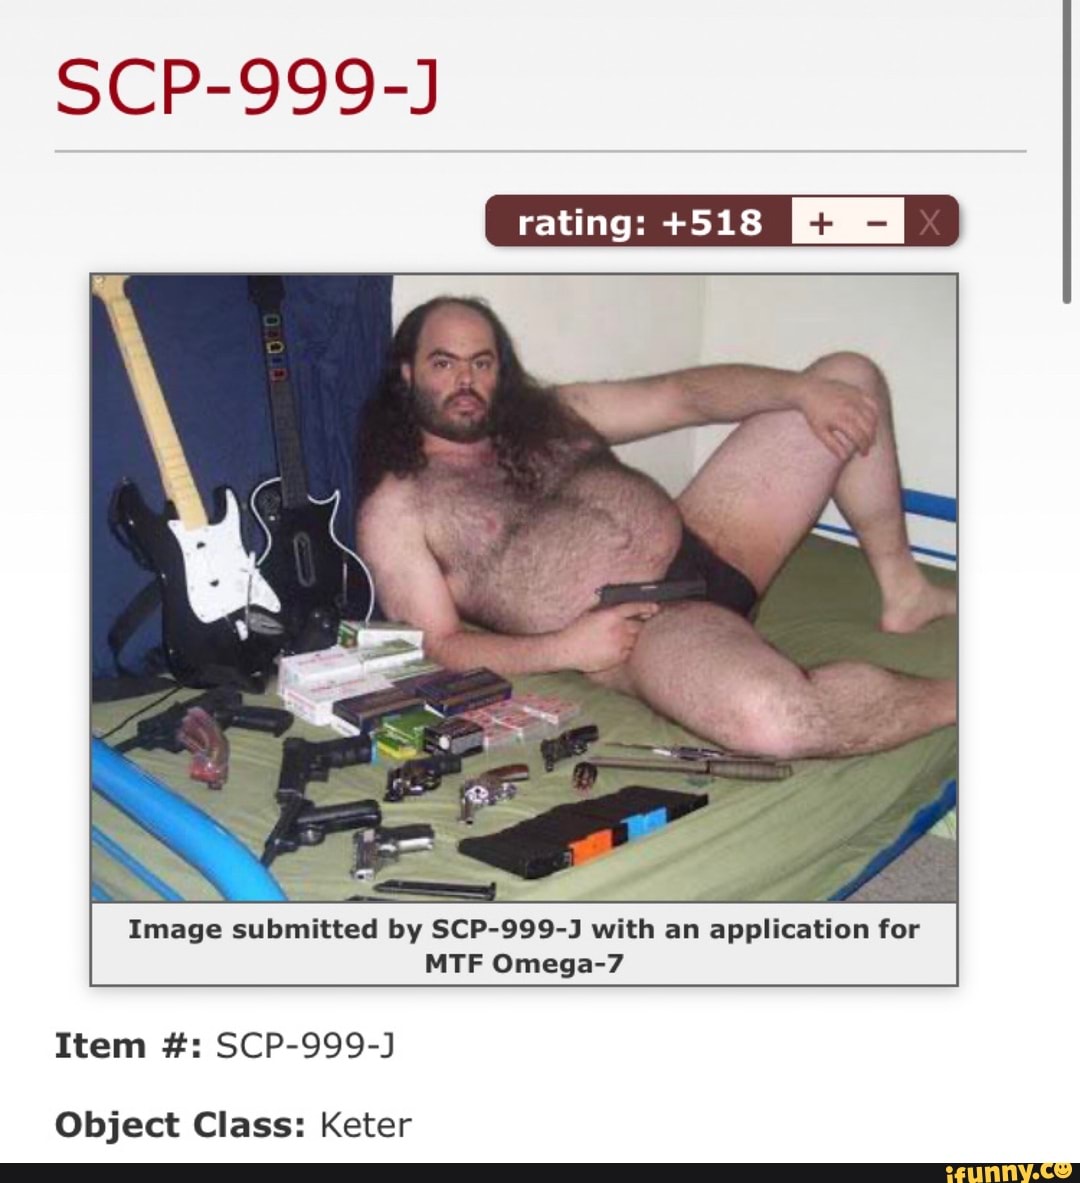 Image submitted by SCP-999-J with an application for MTF Omega-7